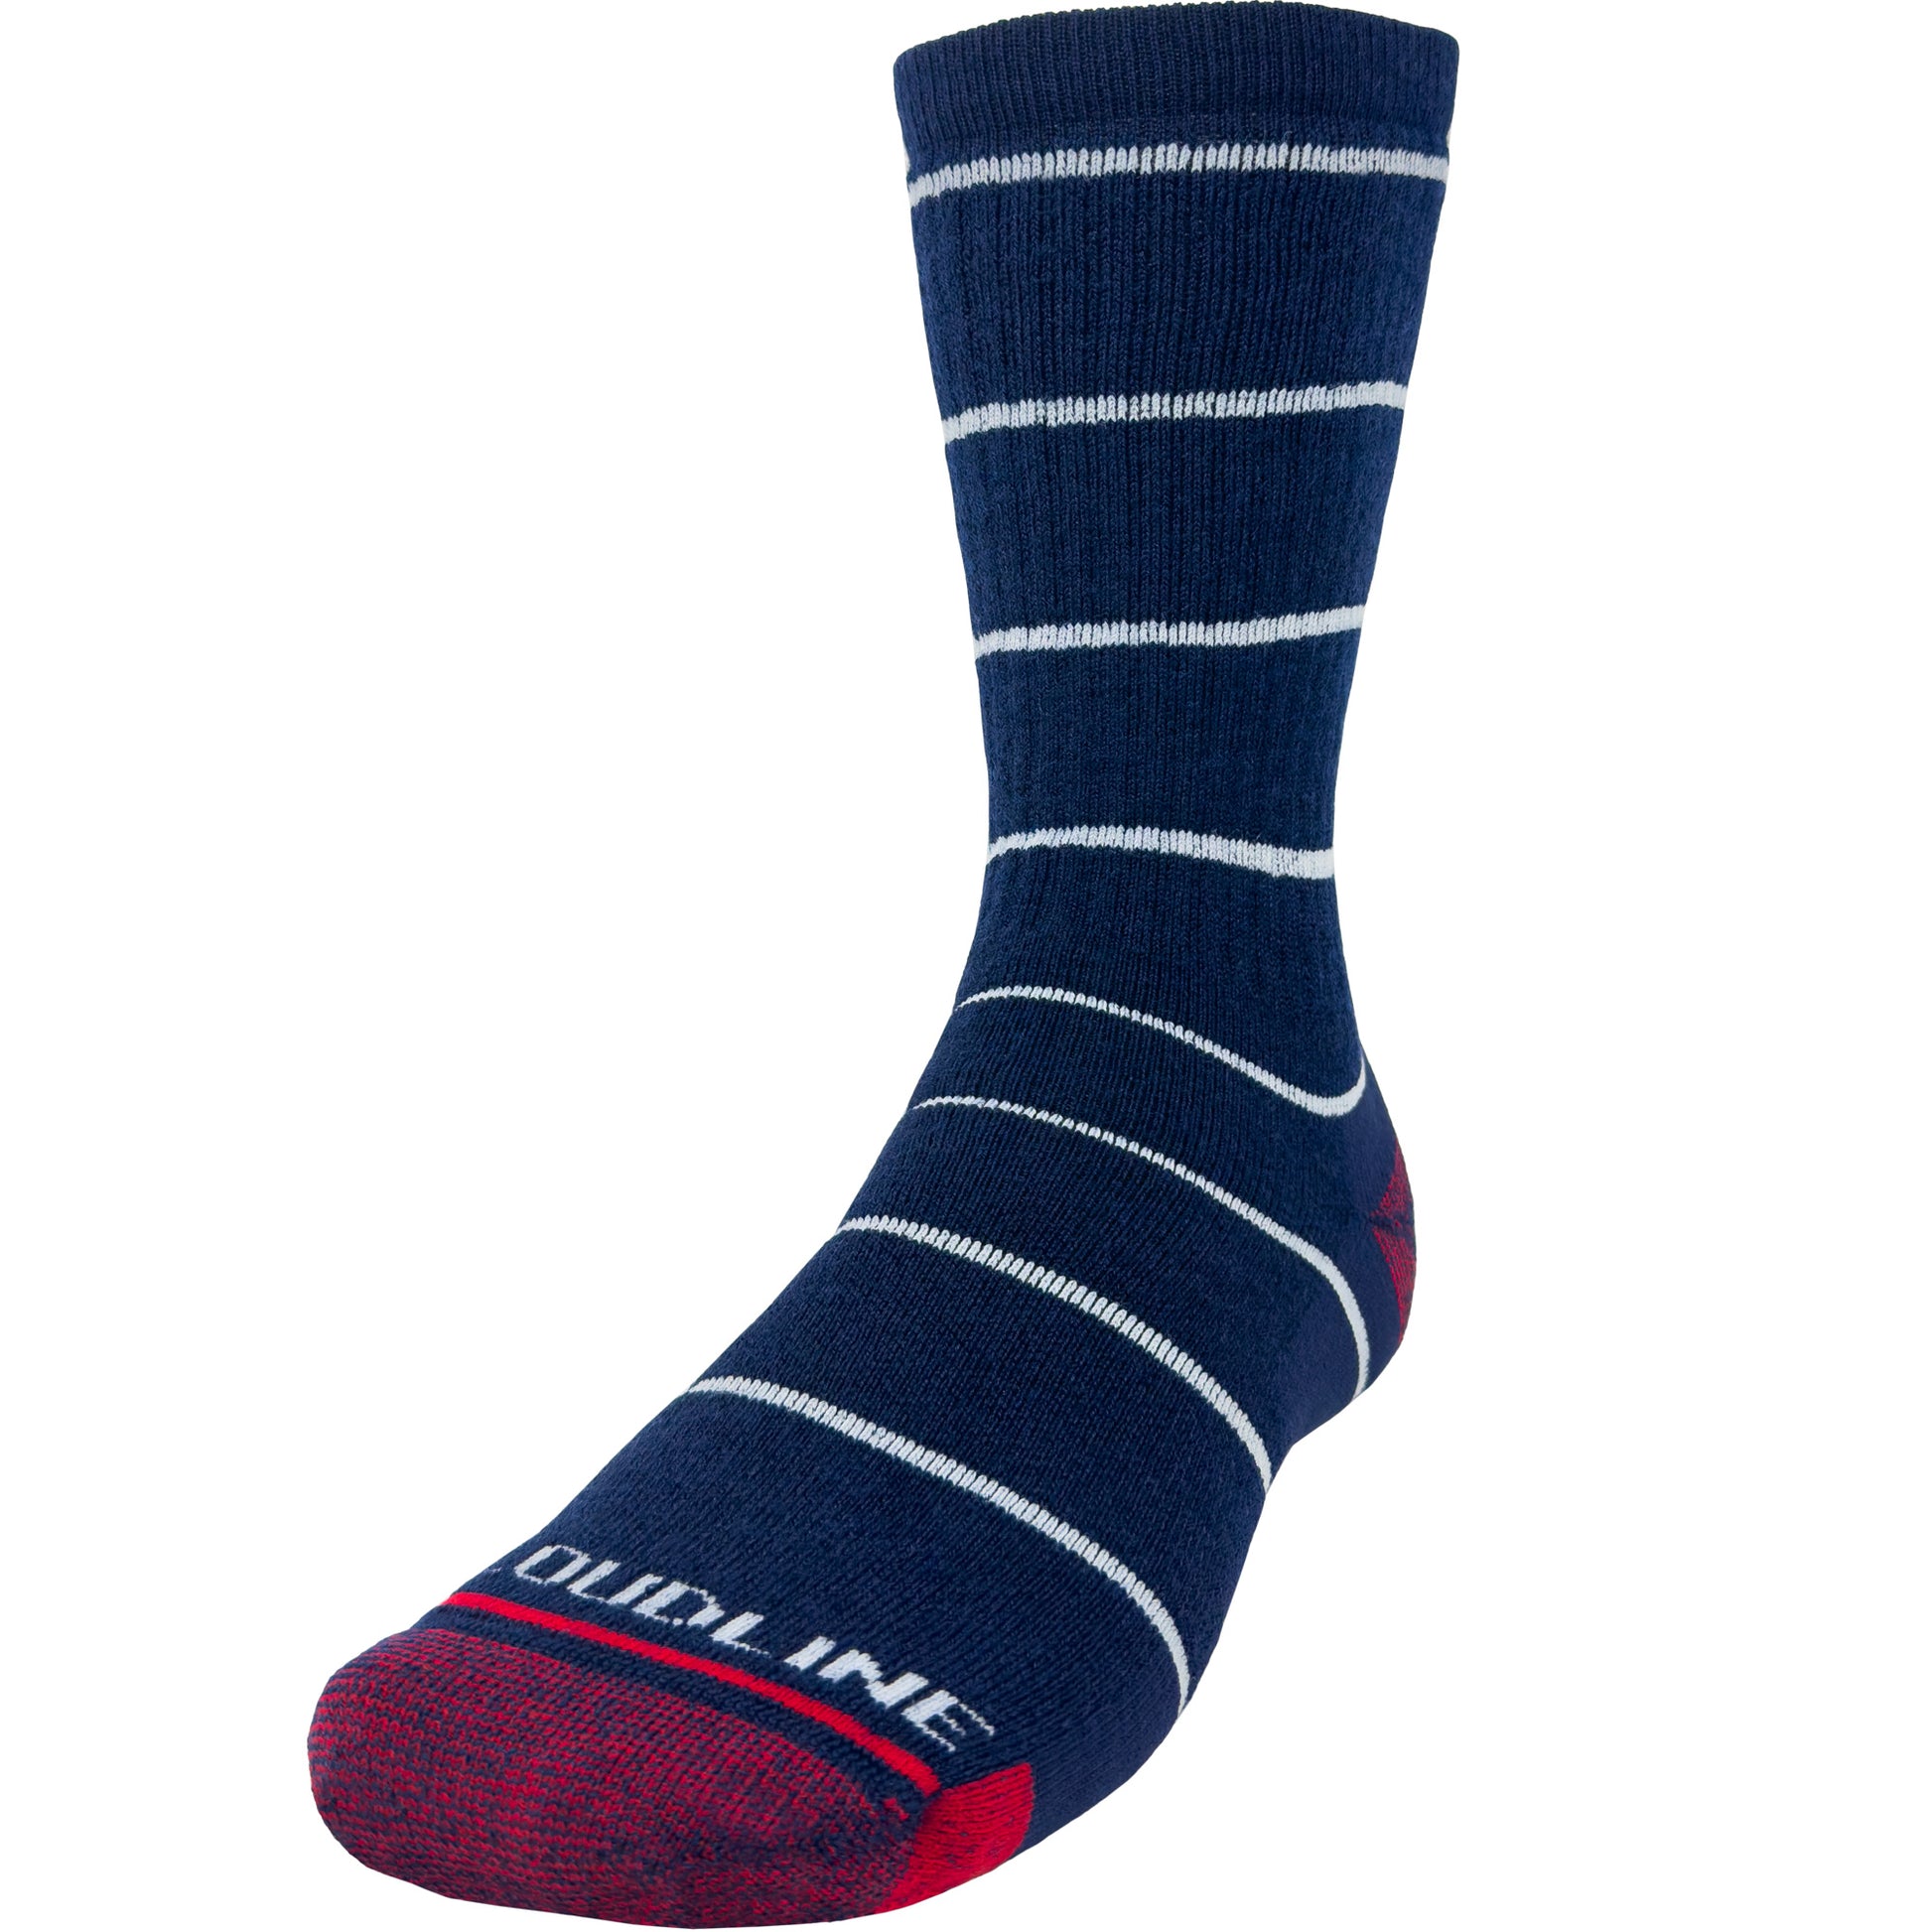 Cloudline Pinstripe Hiking Sock - Medium Cushion - Navy with Light Grey Stripes and Red Toe and Heel. 